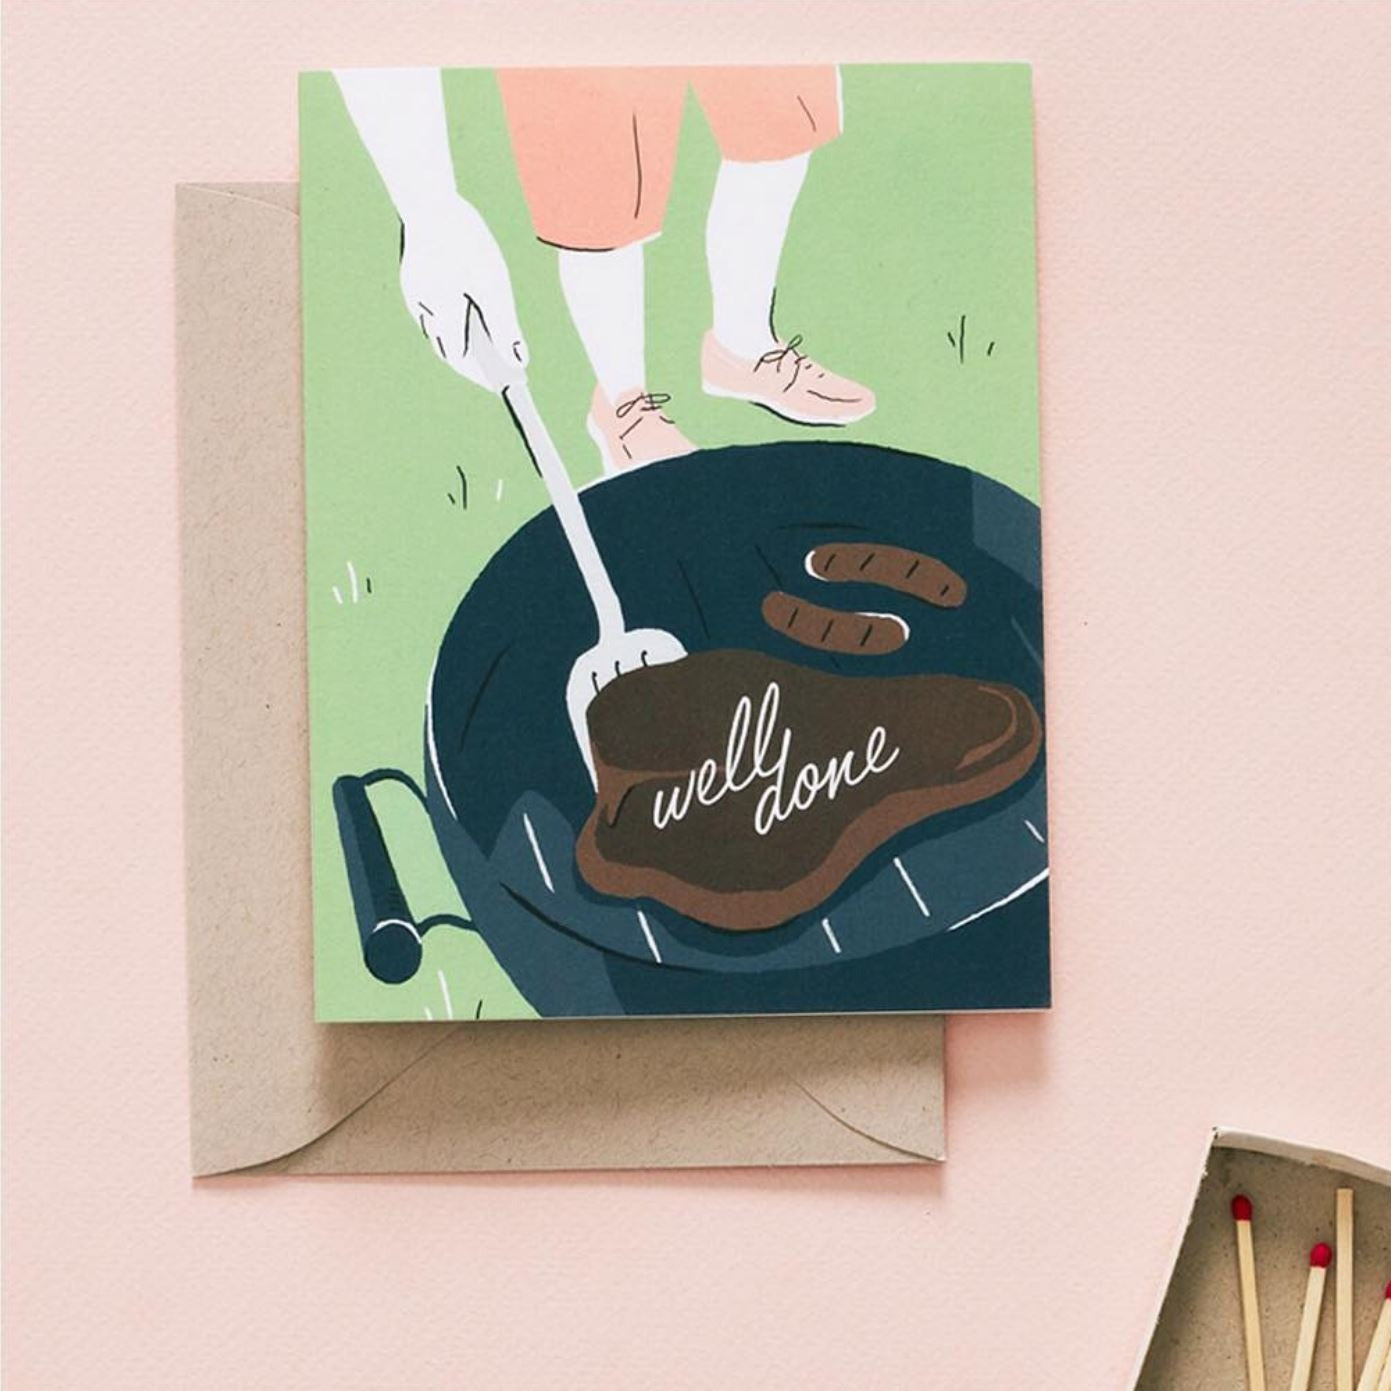 Illustrated 'Well Done' BBQ greeting card on a neutral background, featuring a whimsical steak with the words 'Well Done' written on it, sizzling on a grill.